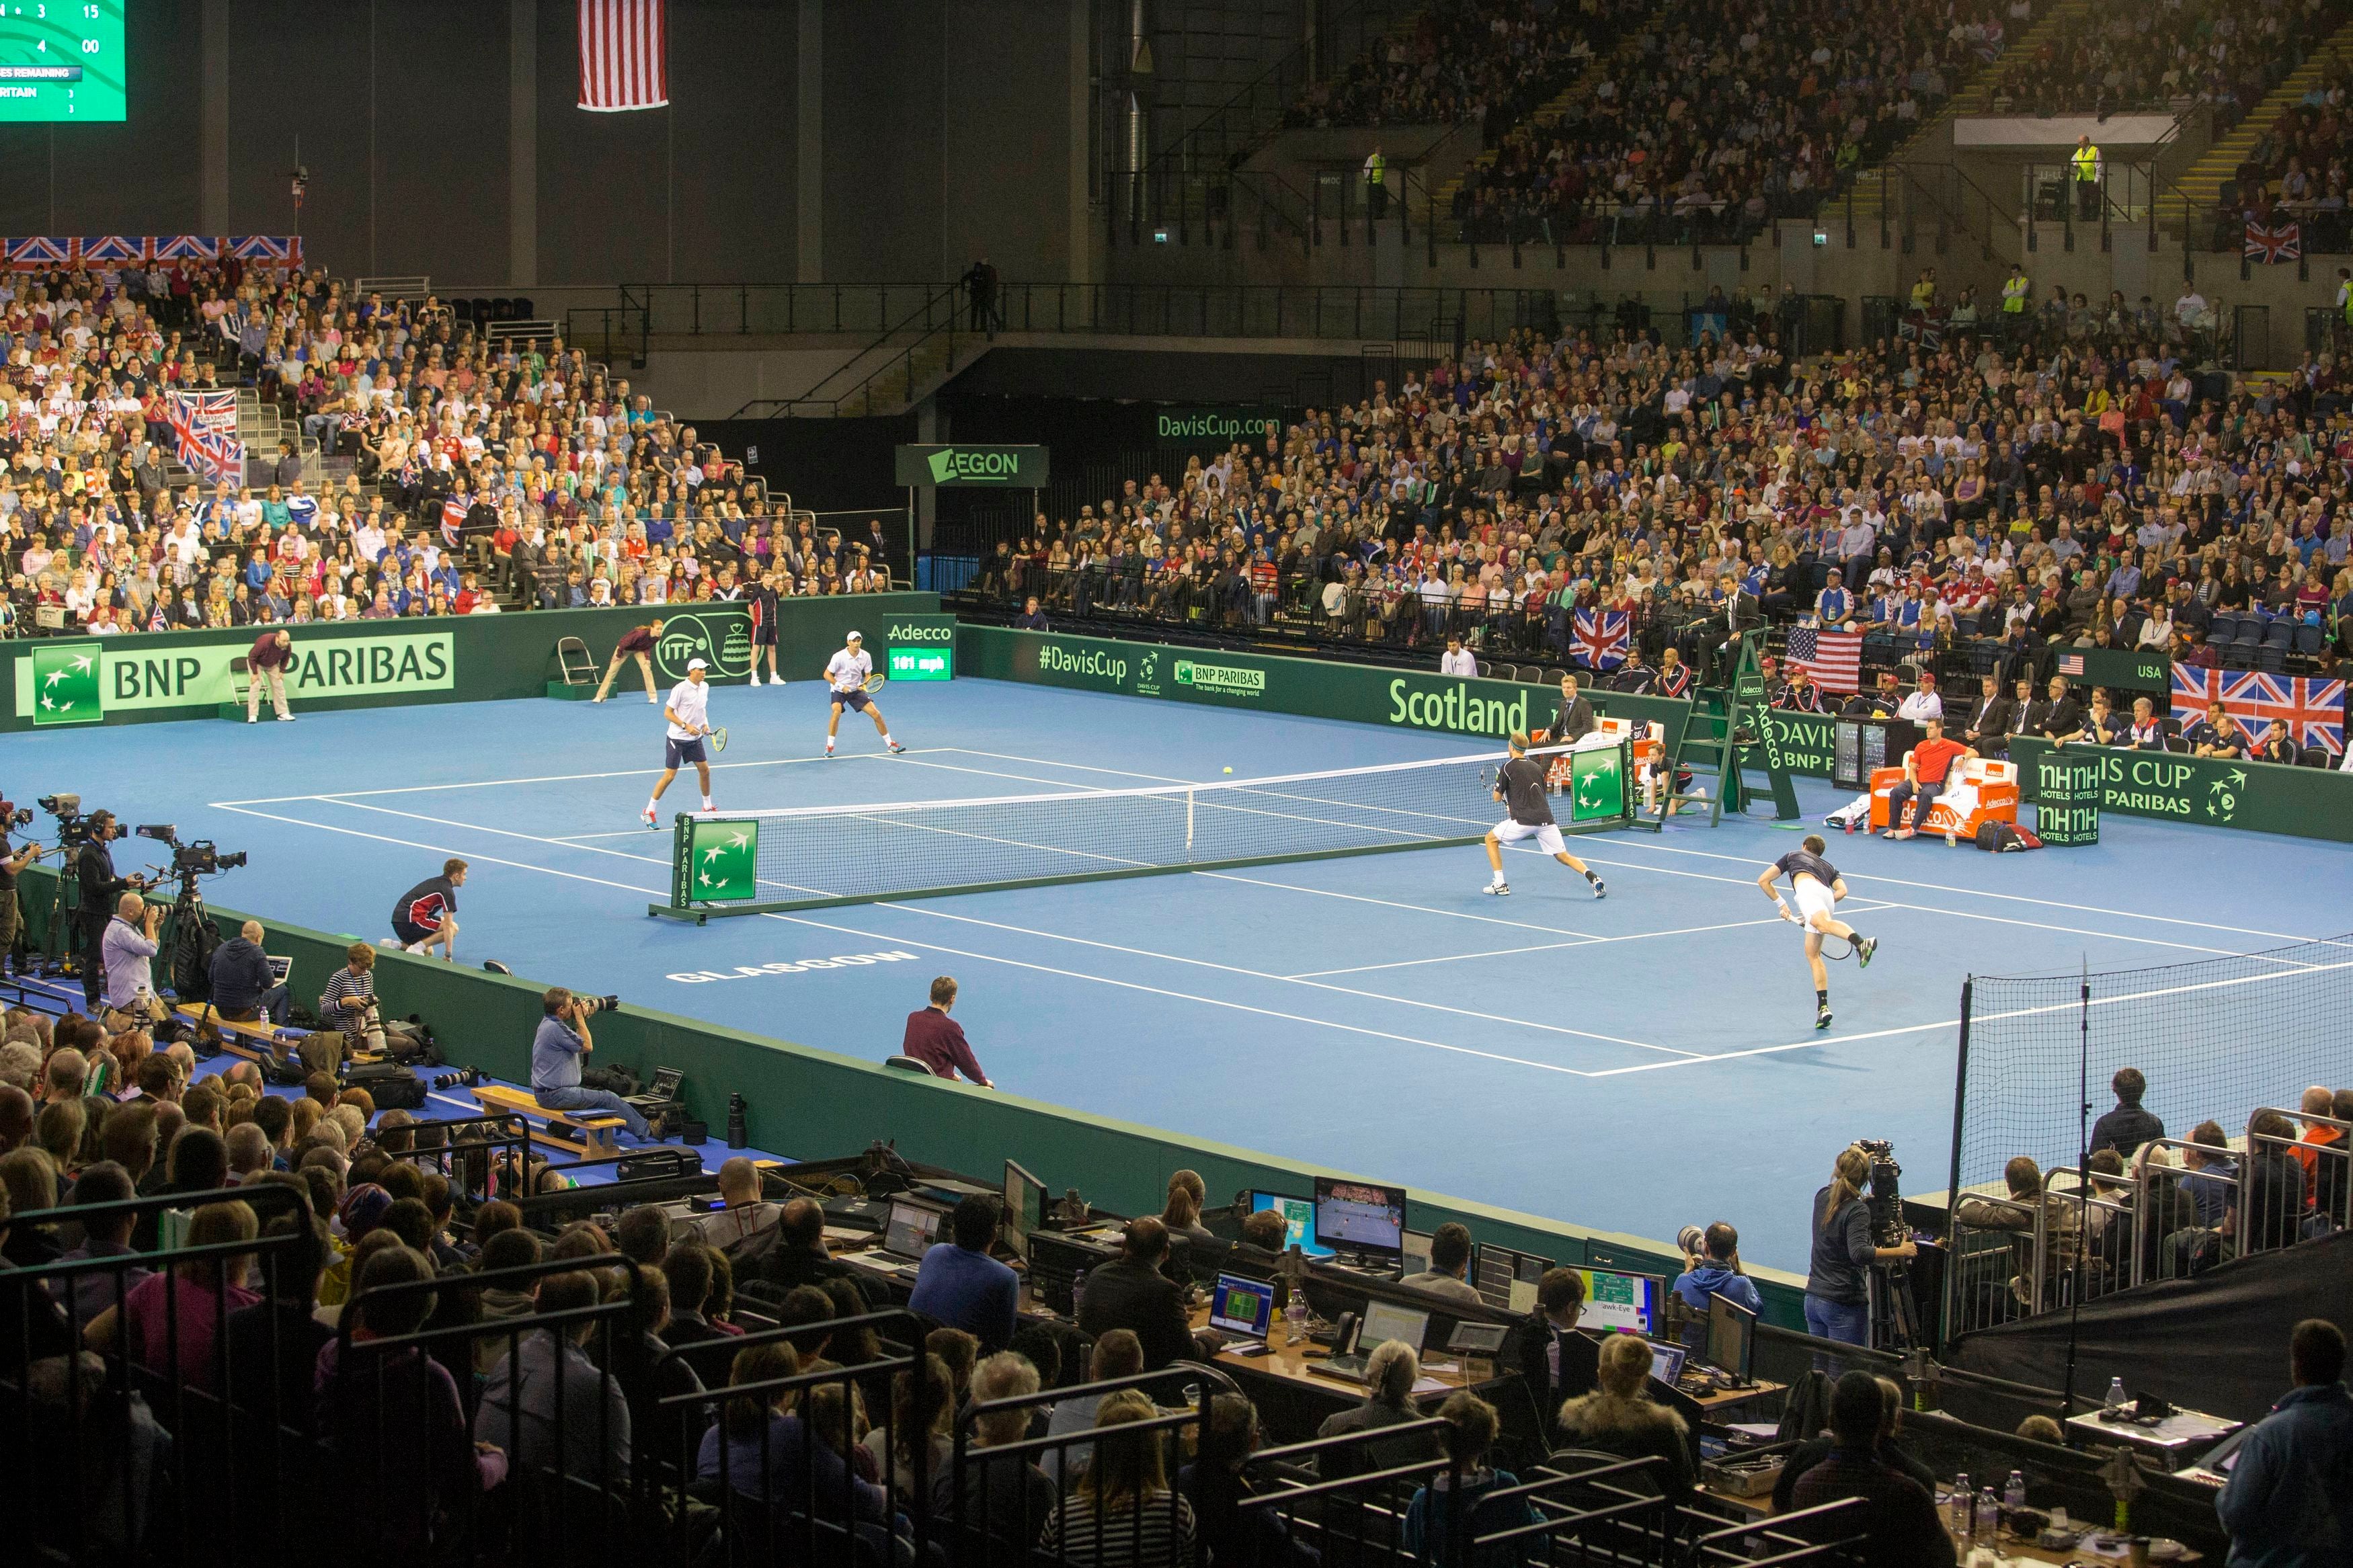 The arena has hosted several Davis Cup ties in previous years (Jeff Holmes/PA)